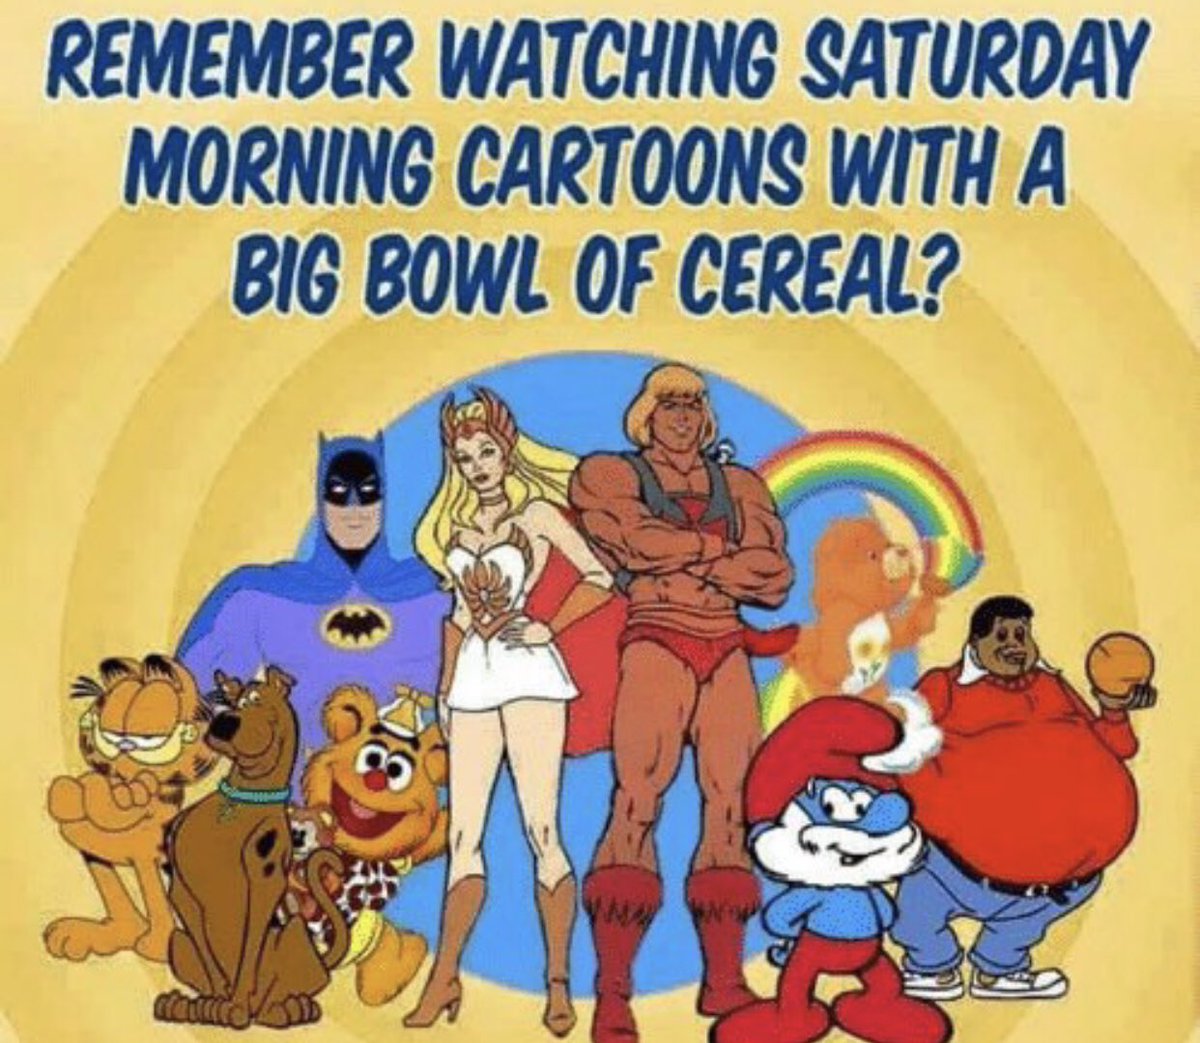 Yep! Saturday morning cartoons are not the same anymore.
#1970s #1980s #70s #80s #saturday #weekendvibes #saturdaymorningcartoons #80scartoons #70scartoons #80snostalgia #70nostalgia #cartoons #vintagecartoons #theufosecret